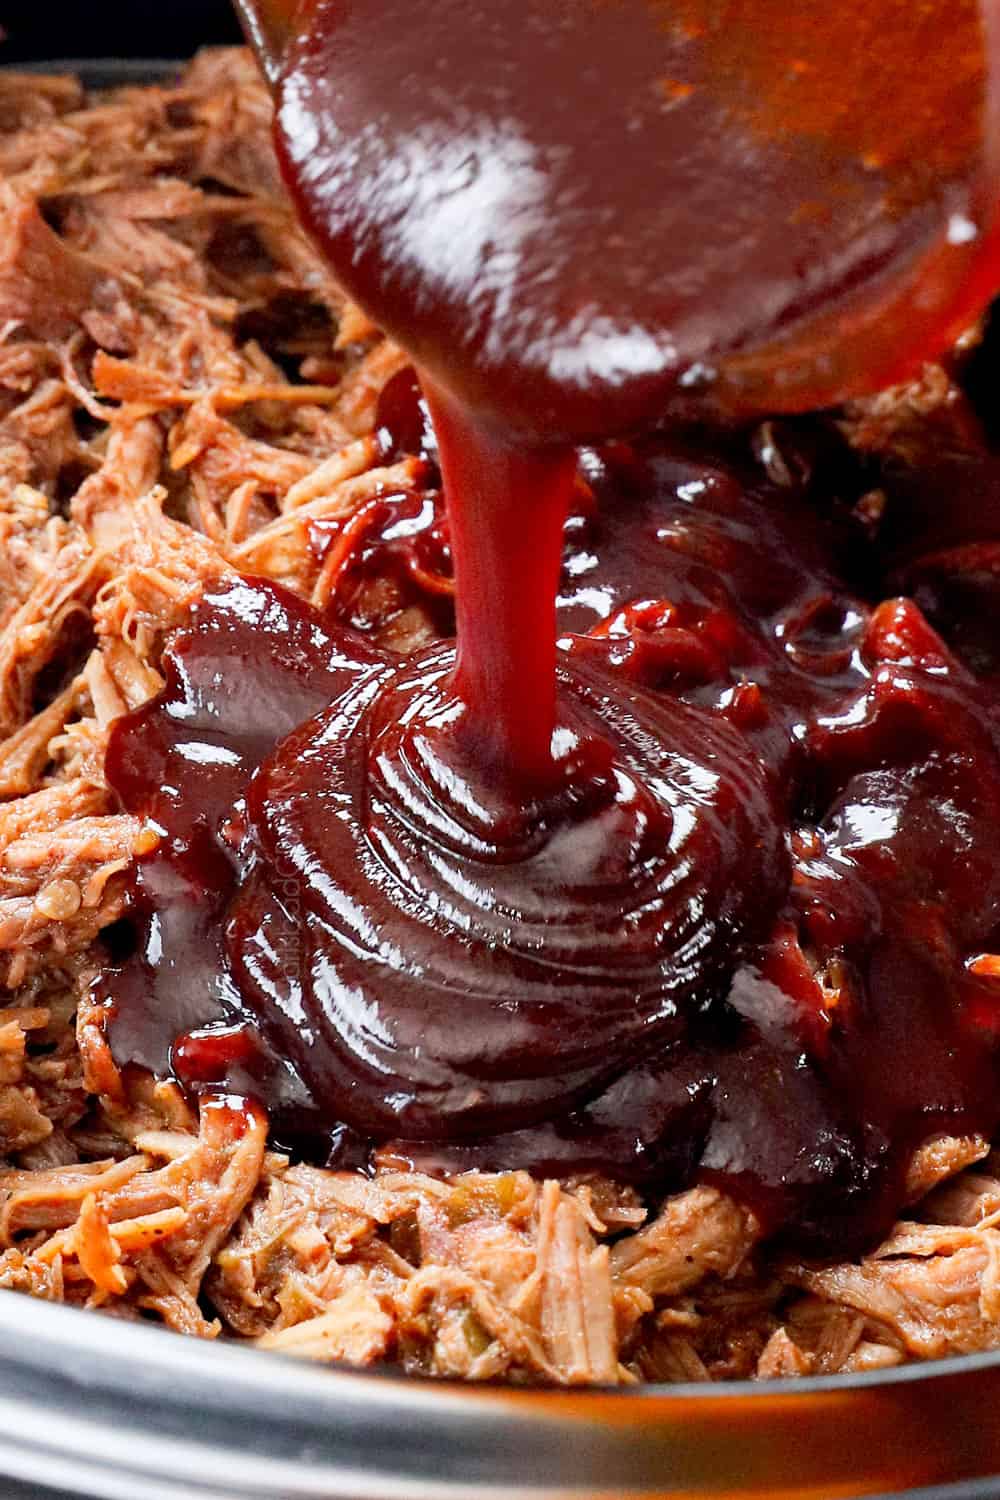 showing how to make pulled pork sandwiches by pouring barbecue sauce over the pulled pork and stirring to combine